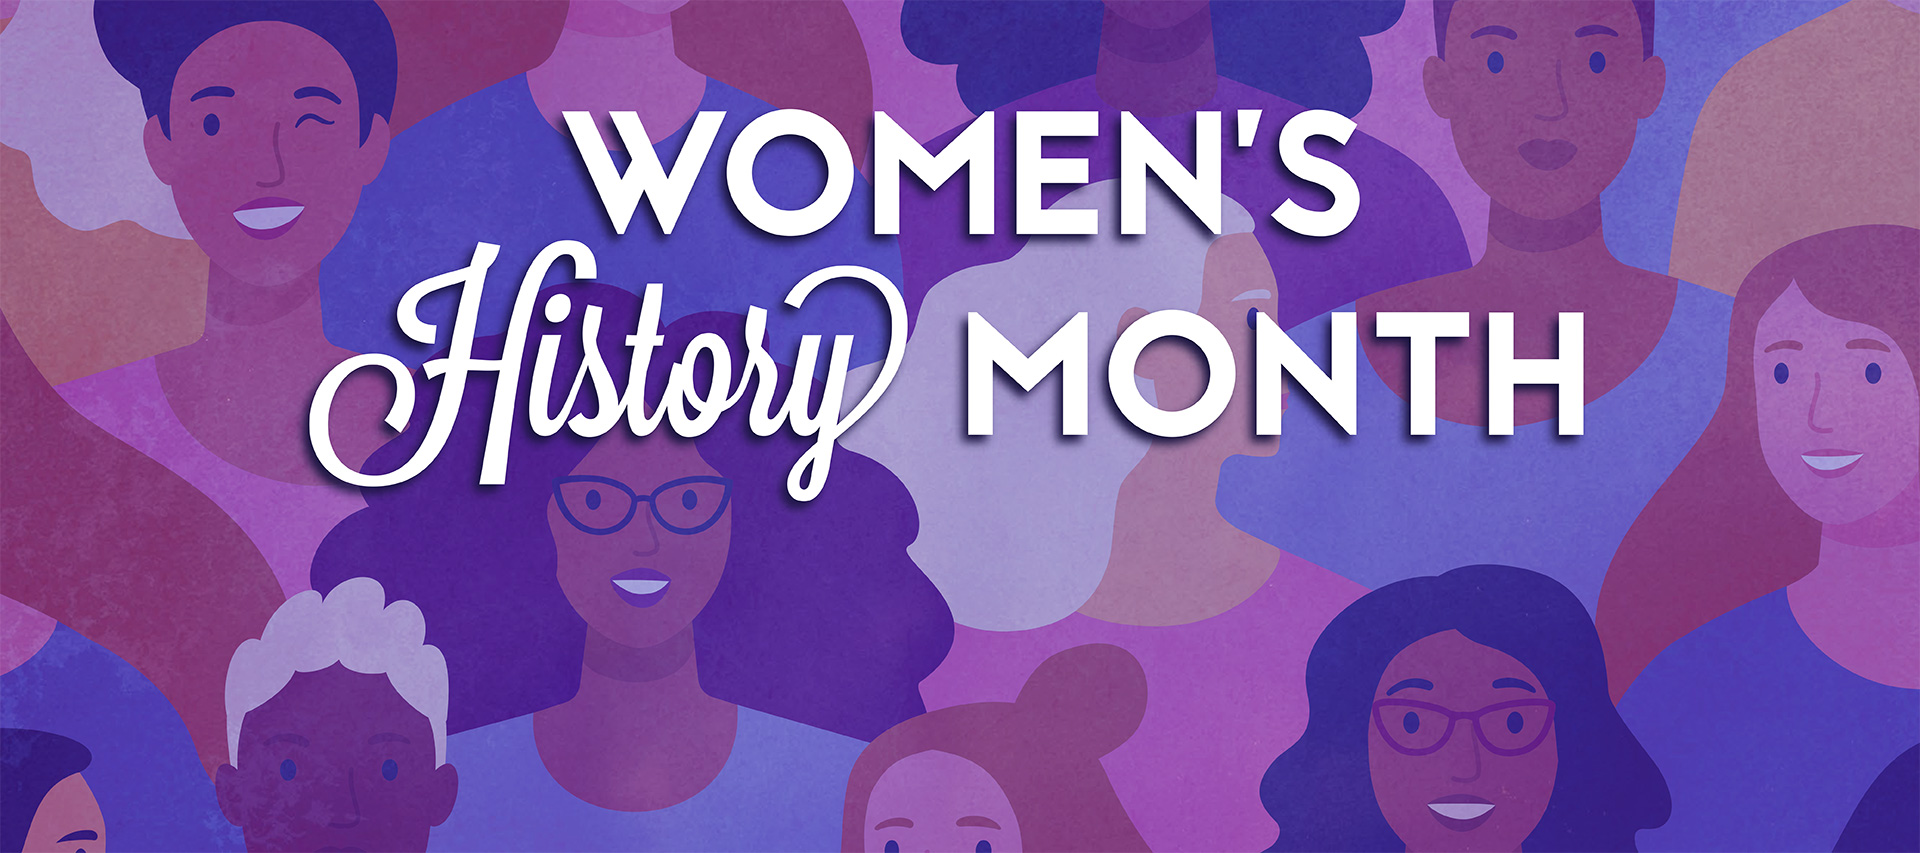 An Illustration of a diverse crowd of women. Text: Women's history month